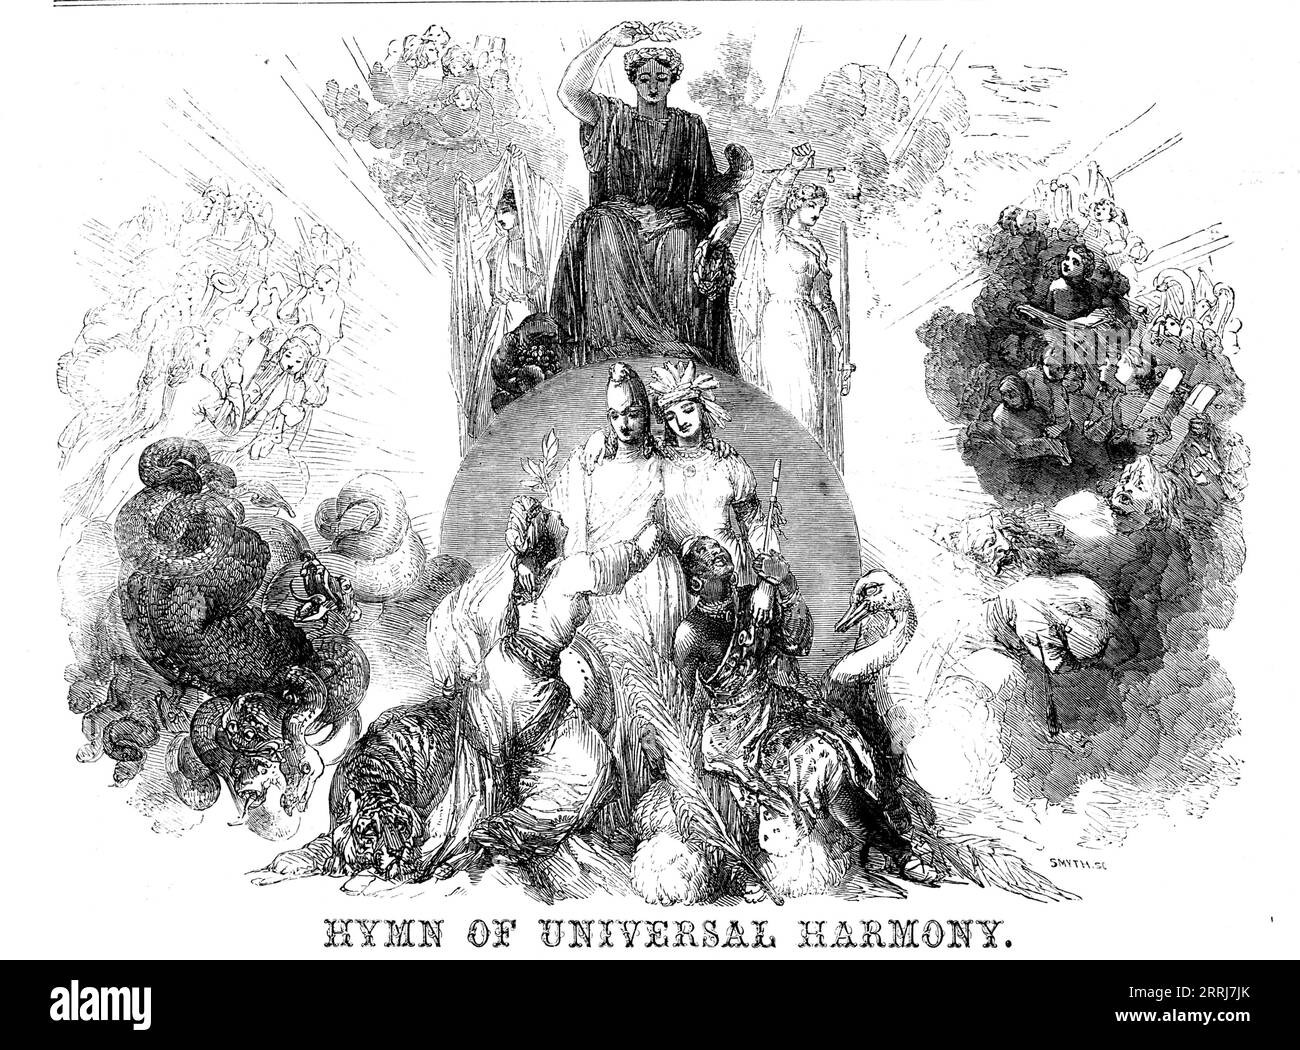 &quot;Hymn of Universal Harmony&quot;, 1858. Music by Jullien. Translated from the French by Desmond Ryan. 'Behold, a brighter morning Than e'er in Heav'n had birth Awakes, and gives glad warning Of Love and Joy on earth. Now Freedom o'er the world her banner waving, Proclaims great Nature's Law - her high Design; With trumpet tongue Commotion's storm out-braving, In concord bids all nations to combine, In concord bids all nations to combine; Dispels the darkling fears mankind enslaving, and links all hears in harmony divine. Sing, let's sing, and waft the blessing Below, around, above; Ev'ry Stock Photo